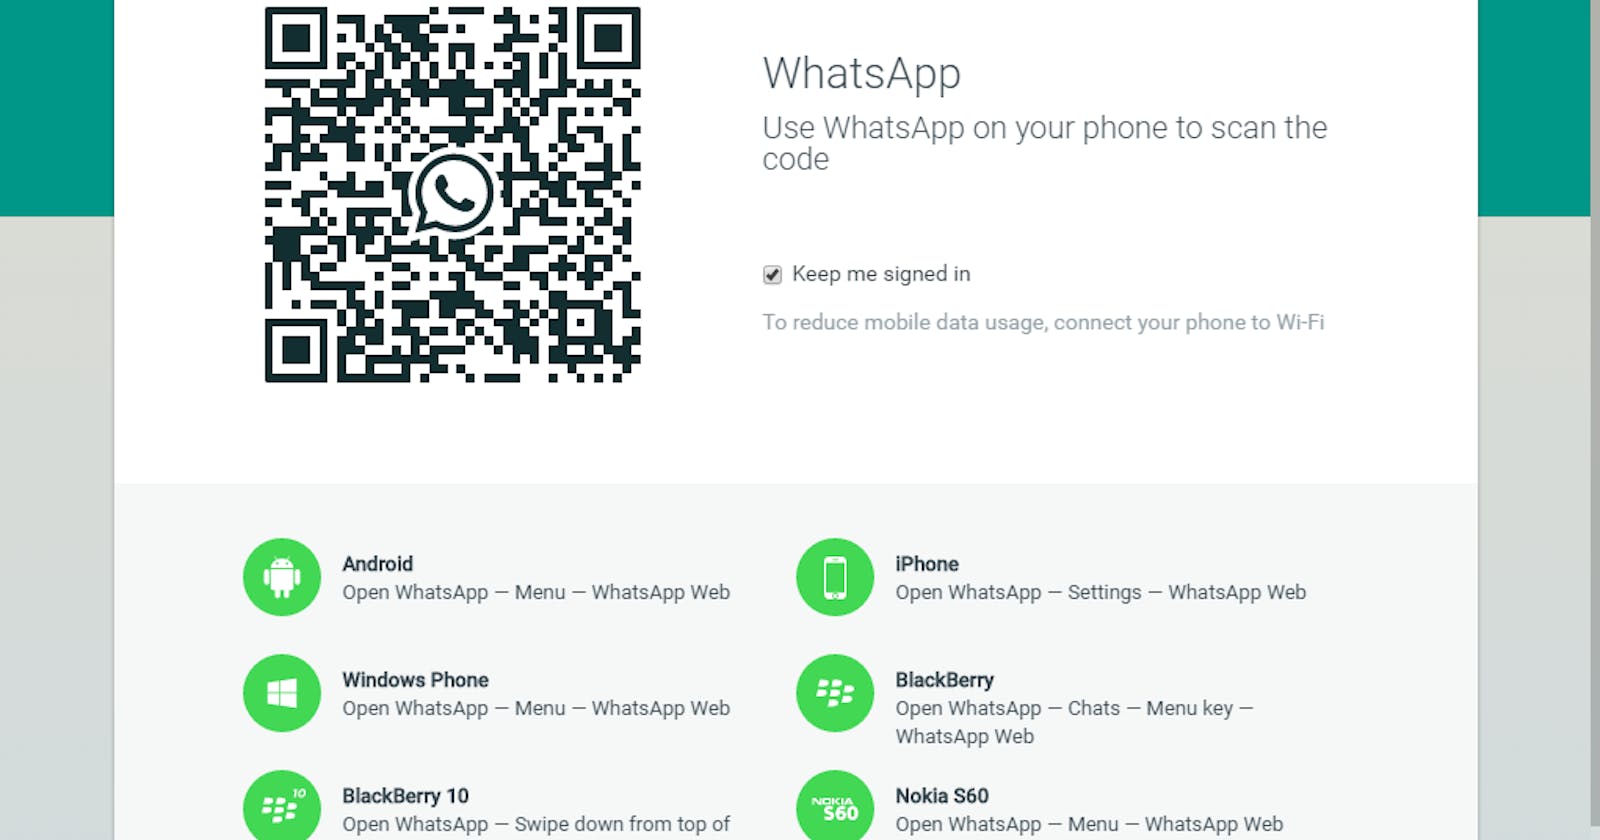 Whatsapp Web For PC/Laptop - Latest Version Free Download